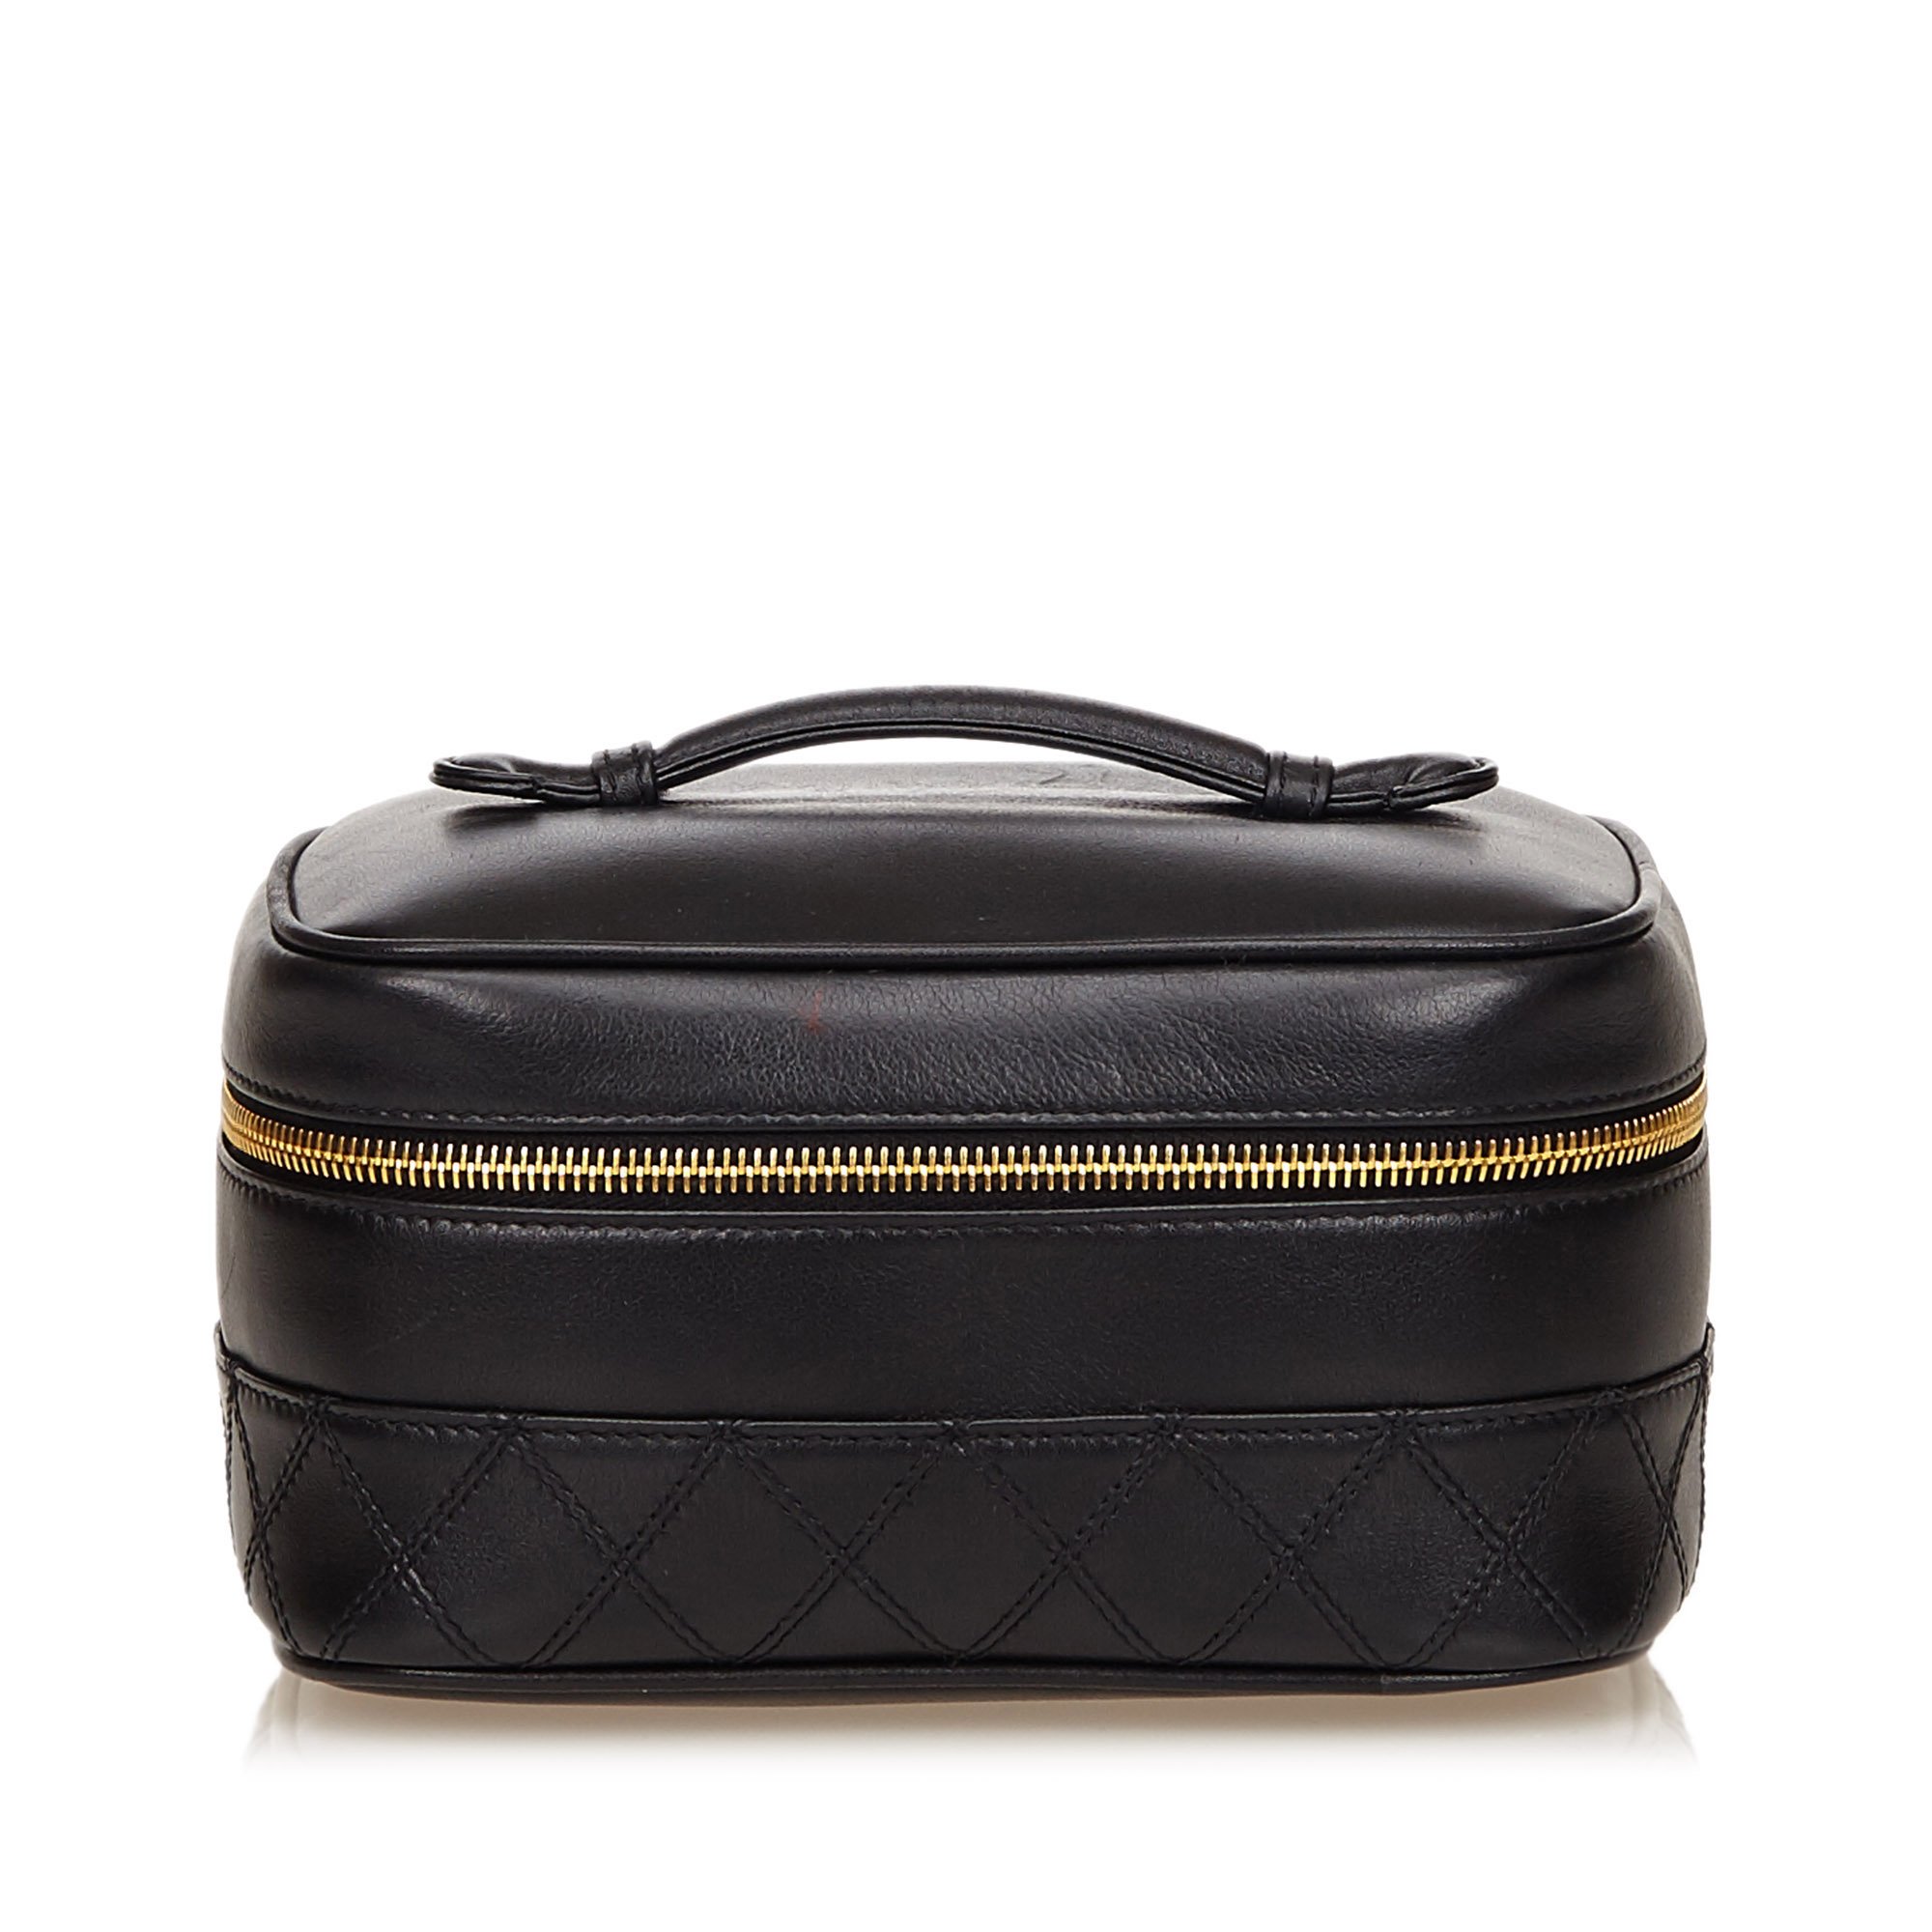 Chanel Black Quilted Lambskin Vanity Case Chanel | The Luxury Closet